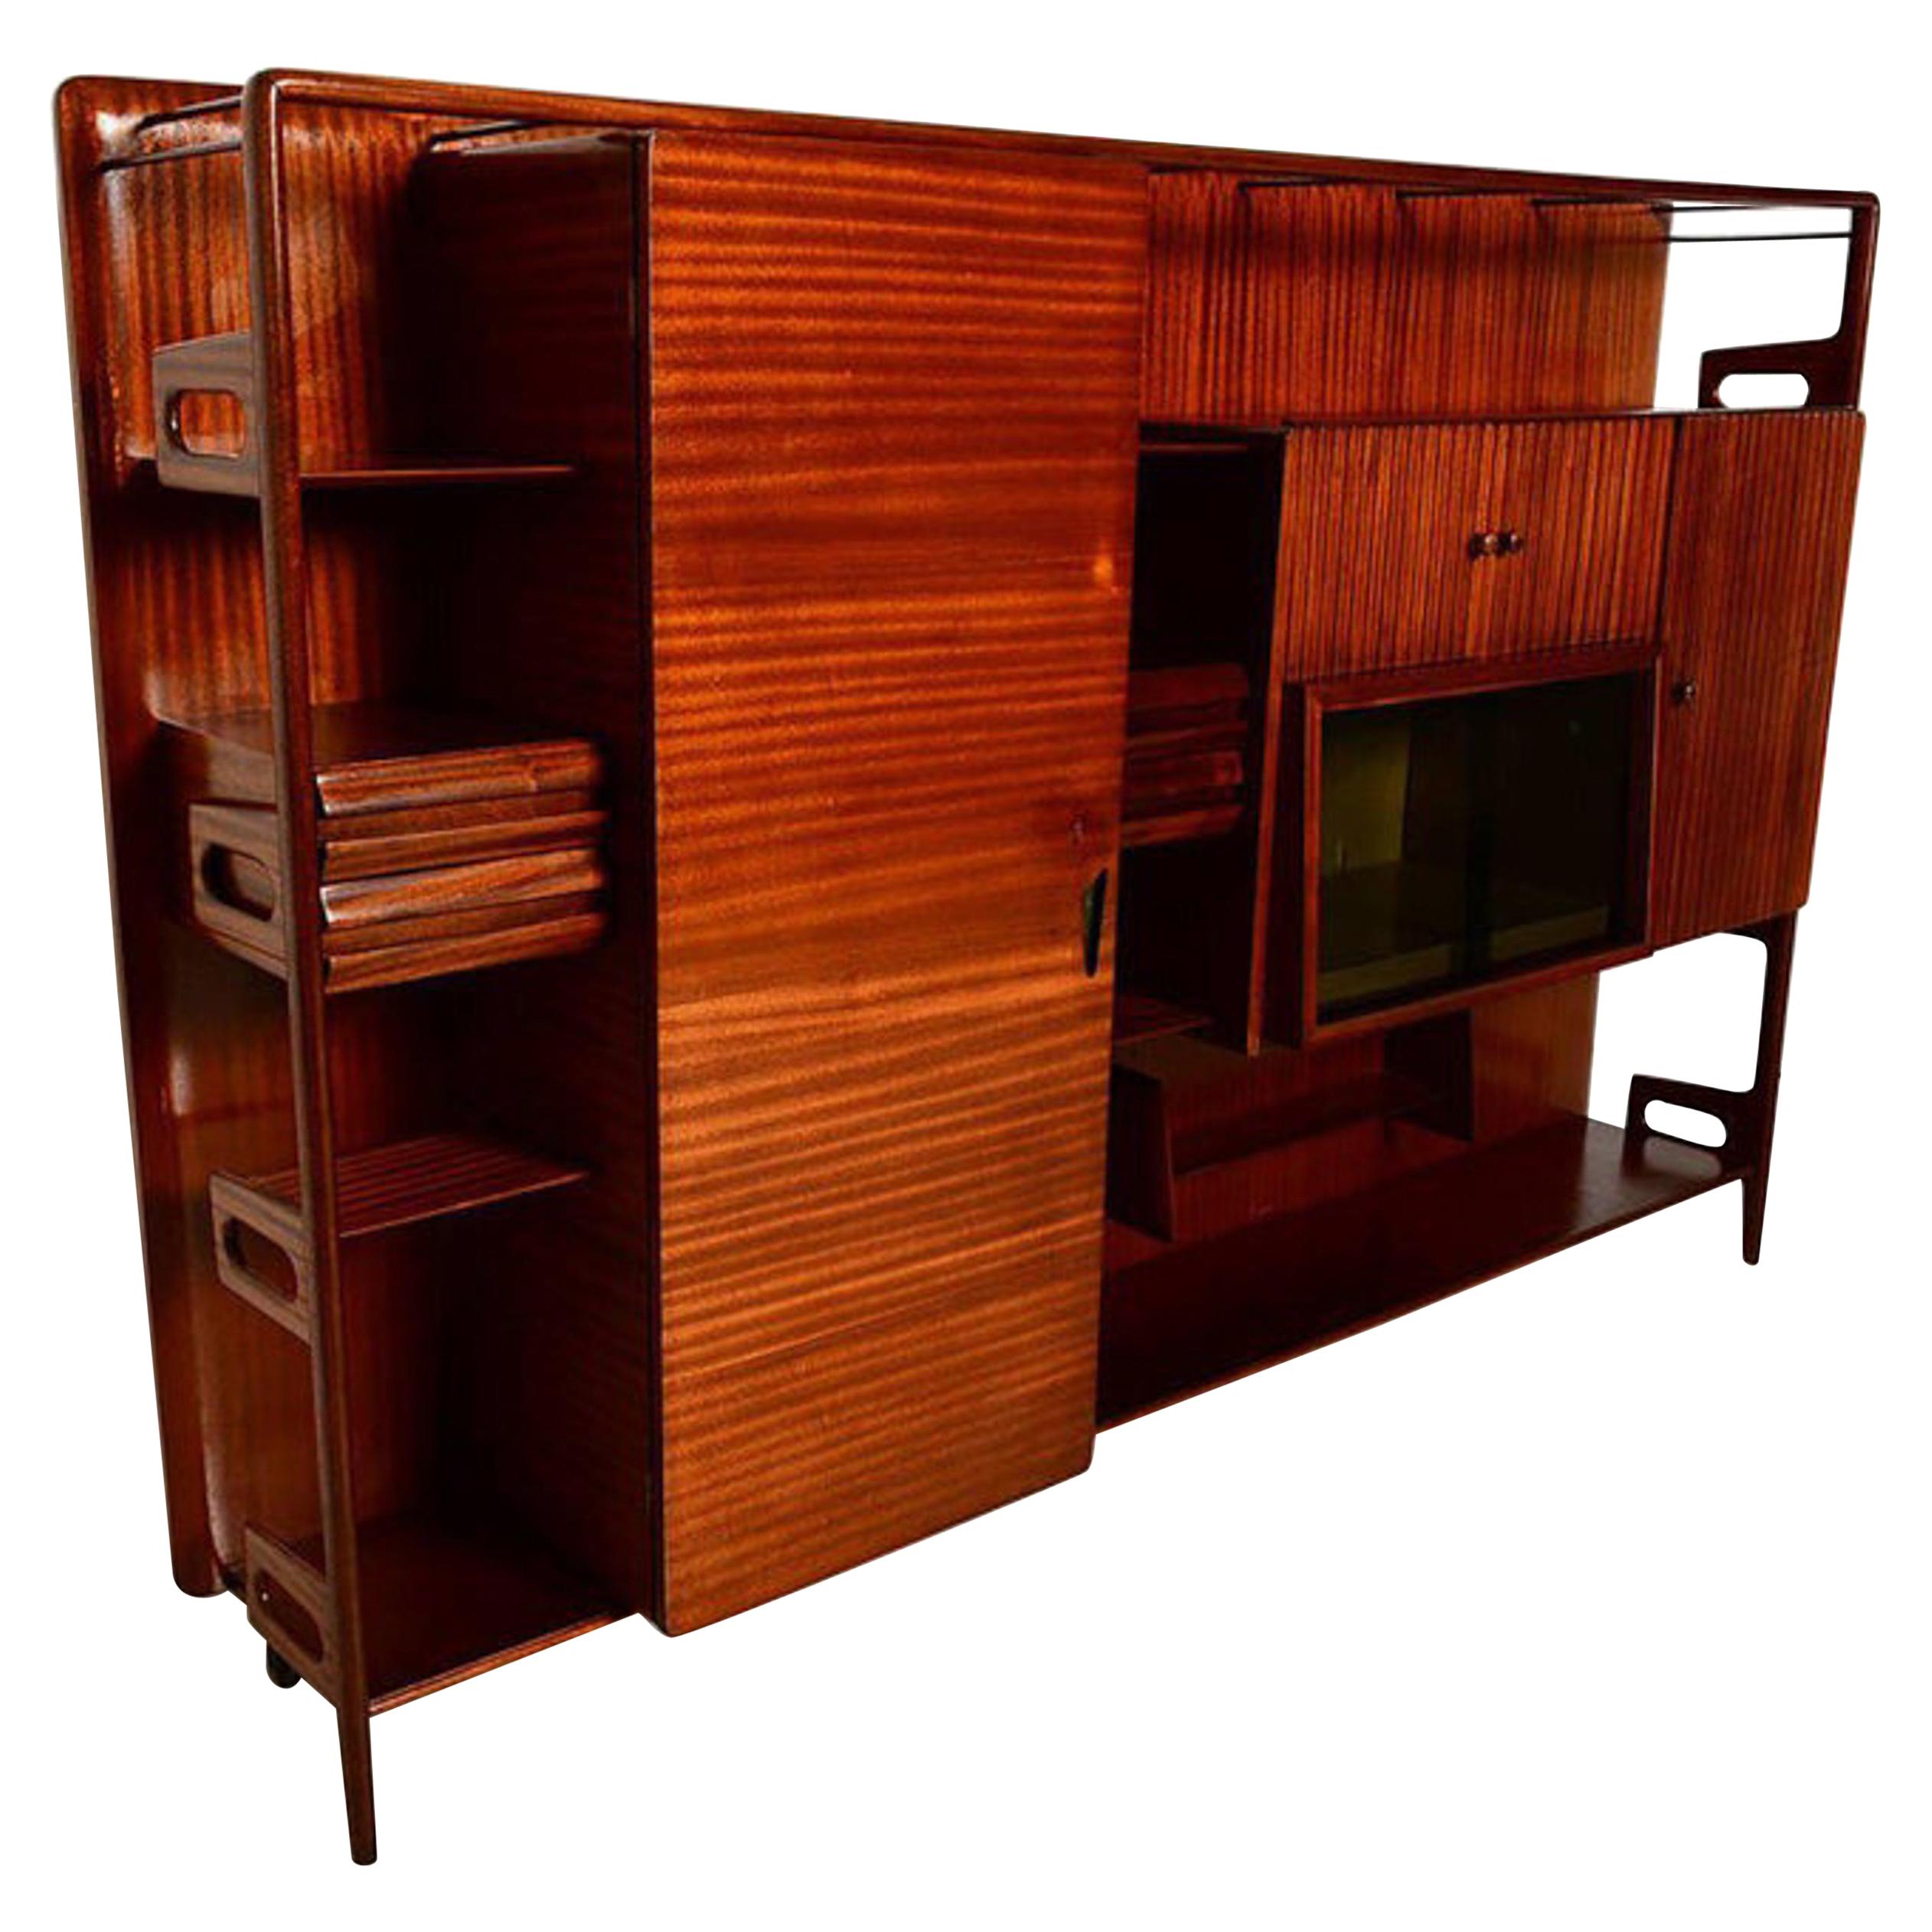 Fine Italian Wall Unit in exotic sapele mahogany Vittorio Dassi ITALY
Unmarked, attribution Vittorio Dassi for DASSI circa 1950s.
Sculptural shape wall cabinet features multiple drawers, storage & open shelving.
Sensational wood grain luster, fine